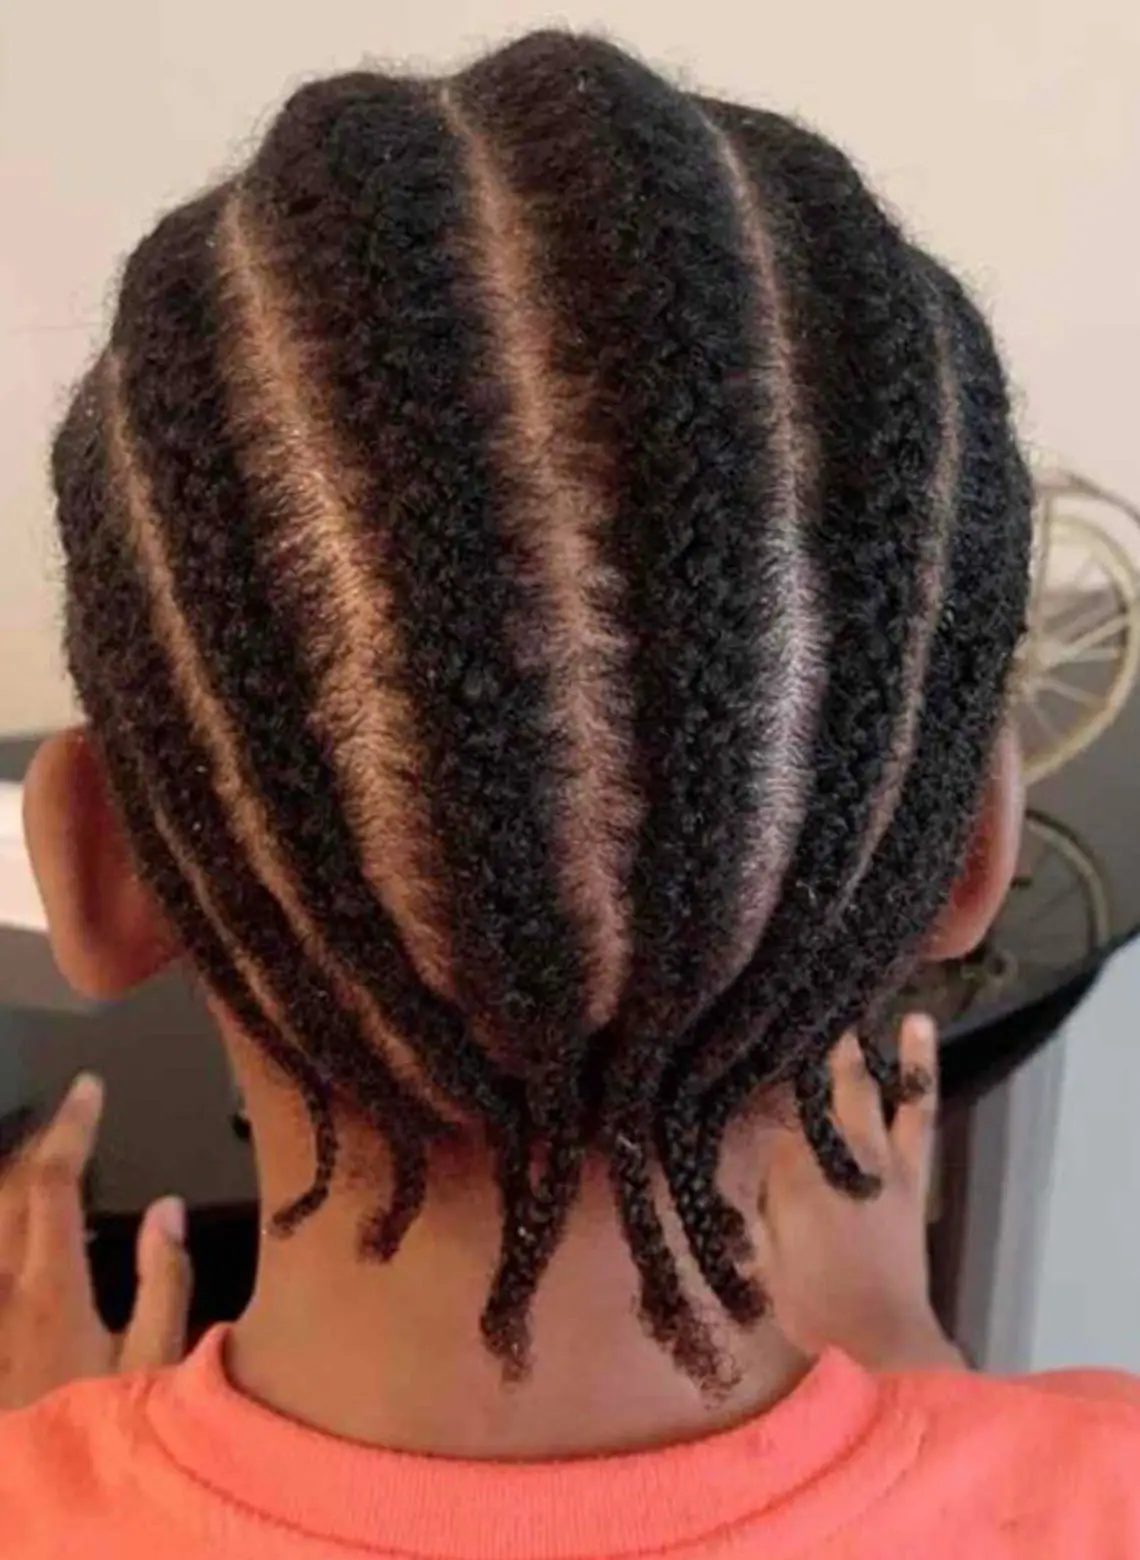 Man with braided over cornrows. 